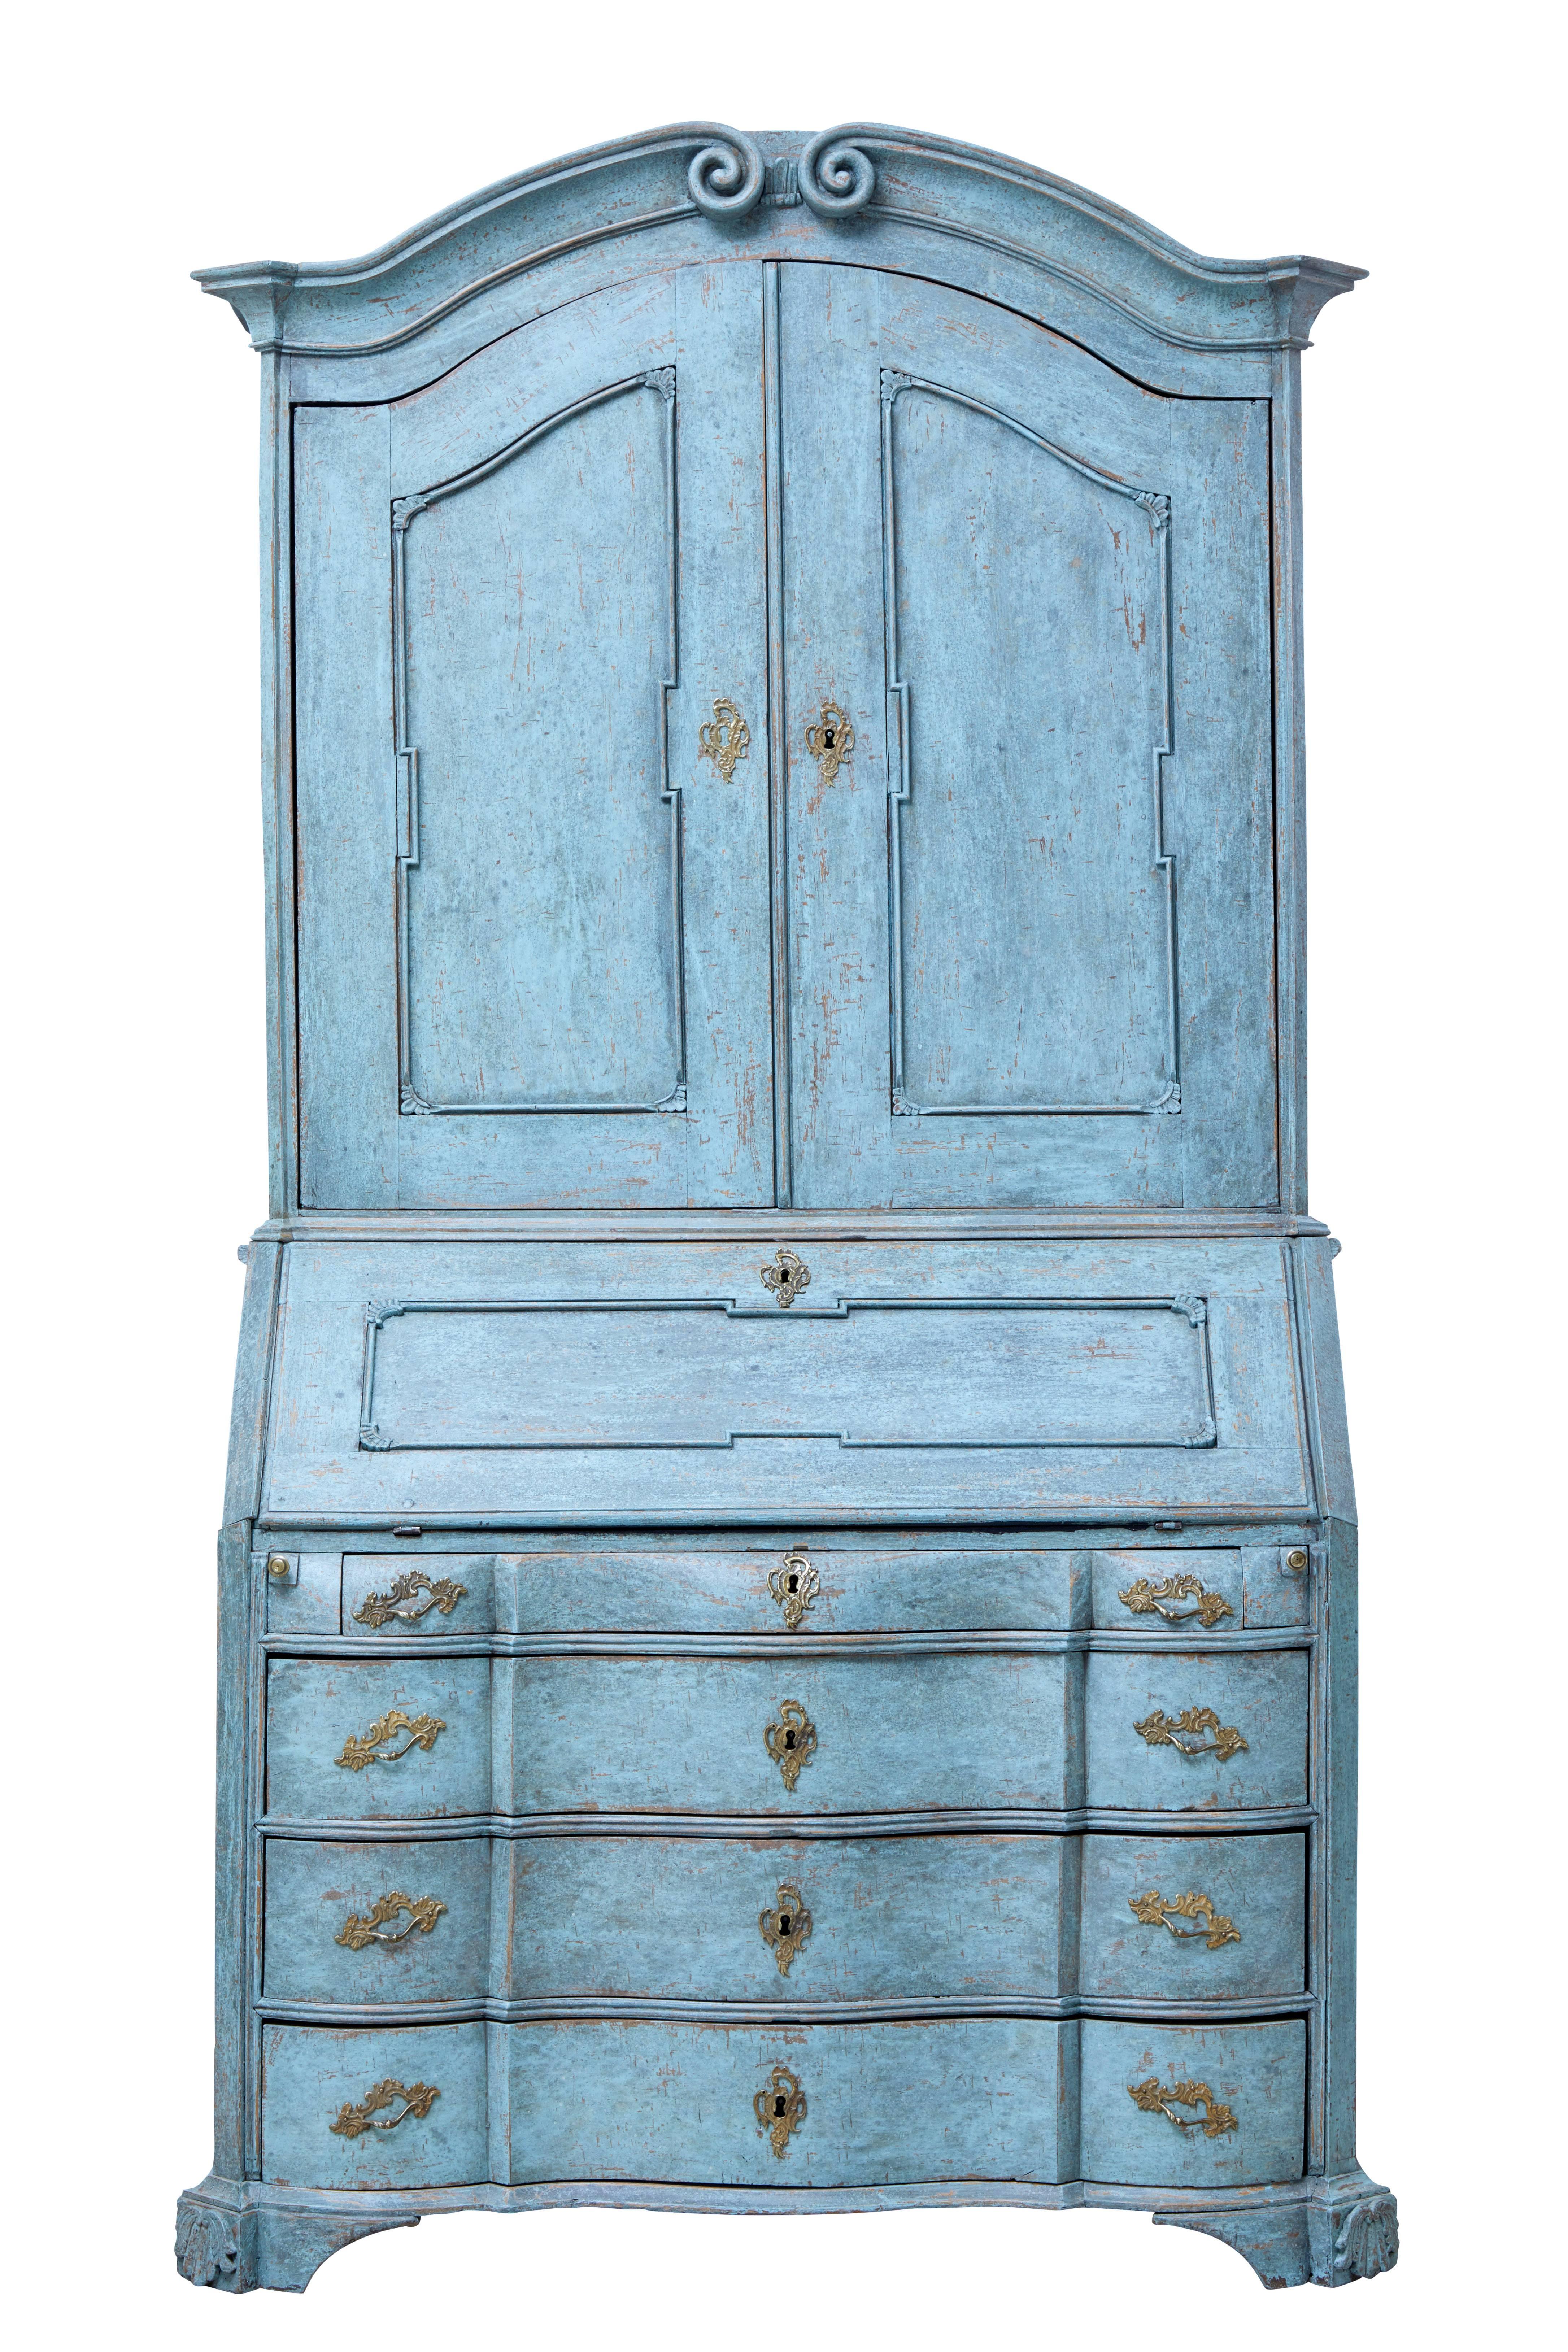 Stunning Baroque Swedish painted bureau bookcase, circa 1780.

Comprising of two parts. Top section with a beautiful deep scrolling cornice, below which the double doors open to three shelves. Bottom section with moulded bureau front, fall opens